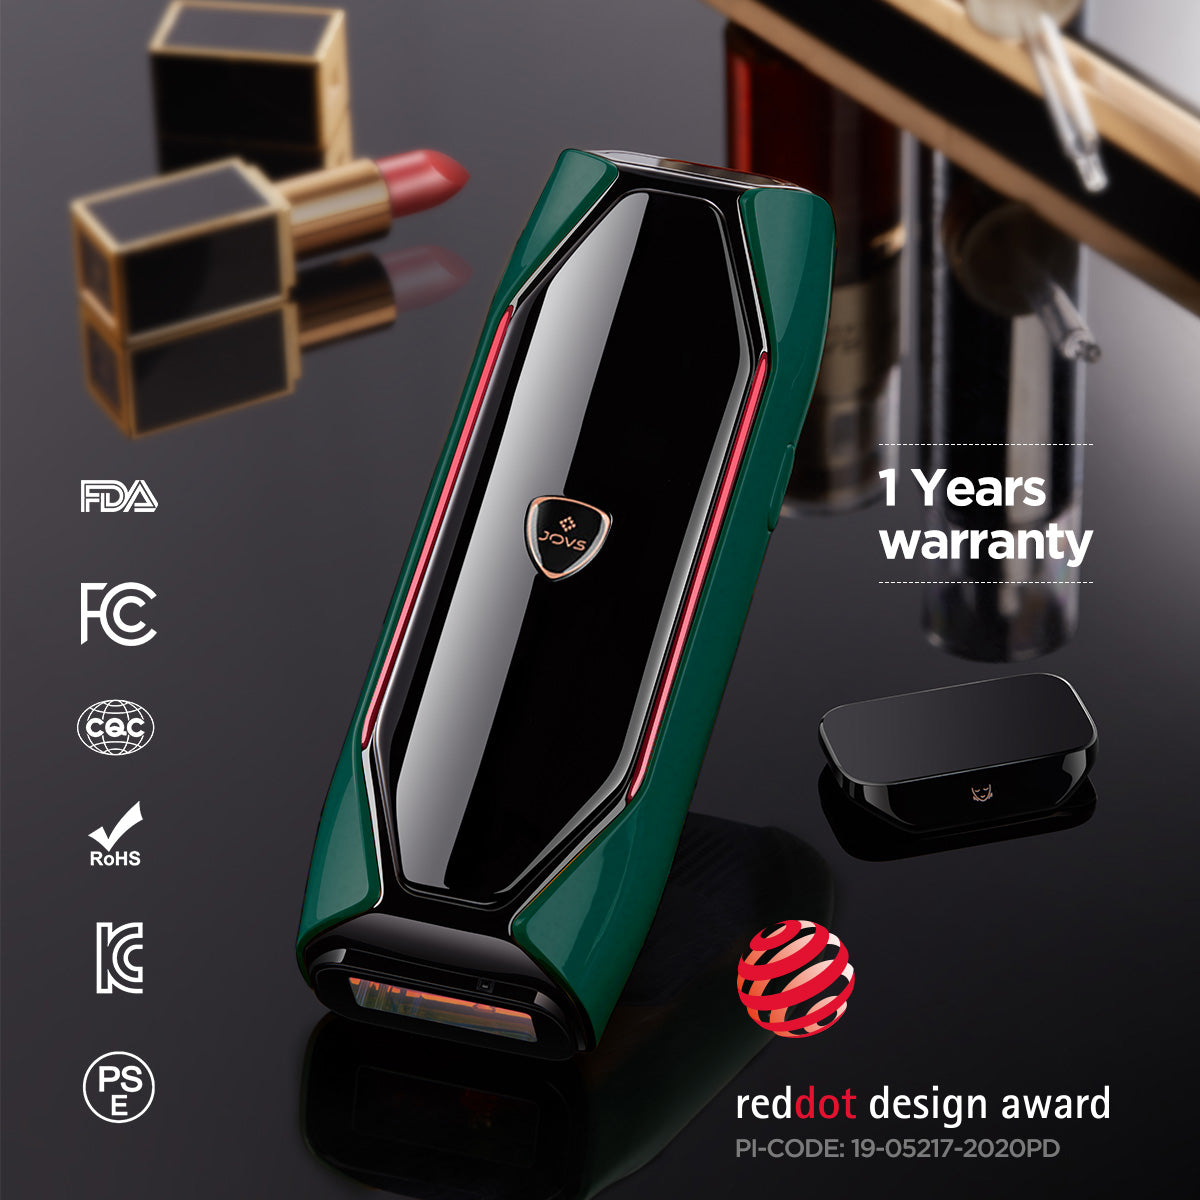 JOVS X™ IPL hair removal device with red dot design award and certifications, offering a 1-year warranty for quality assurance.